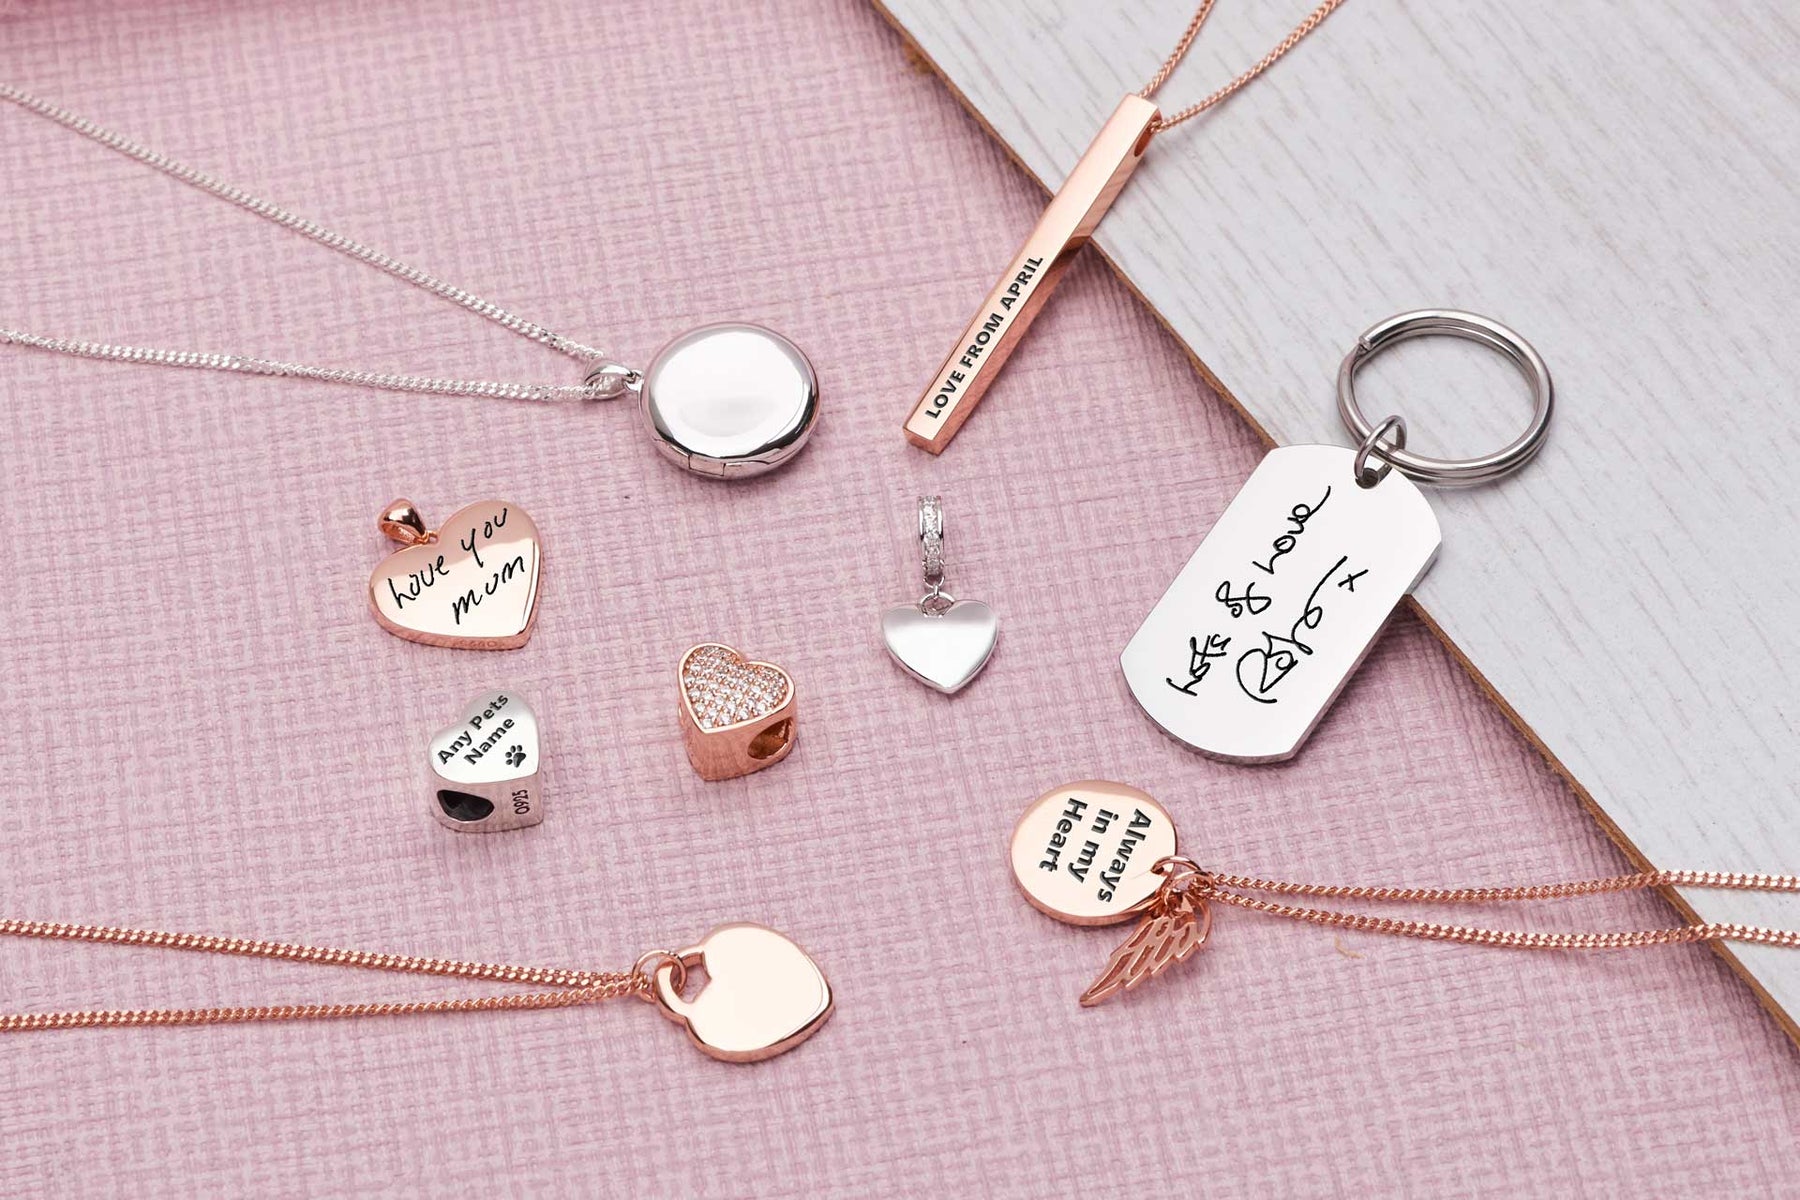 Personalised engraved necklaces and jewellery